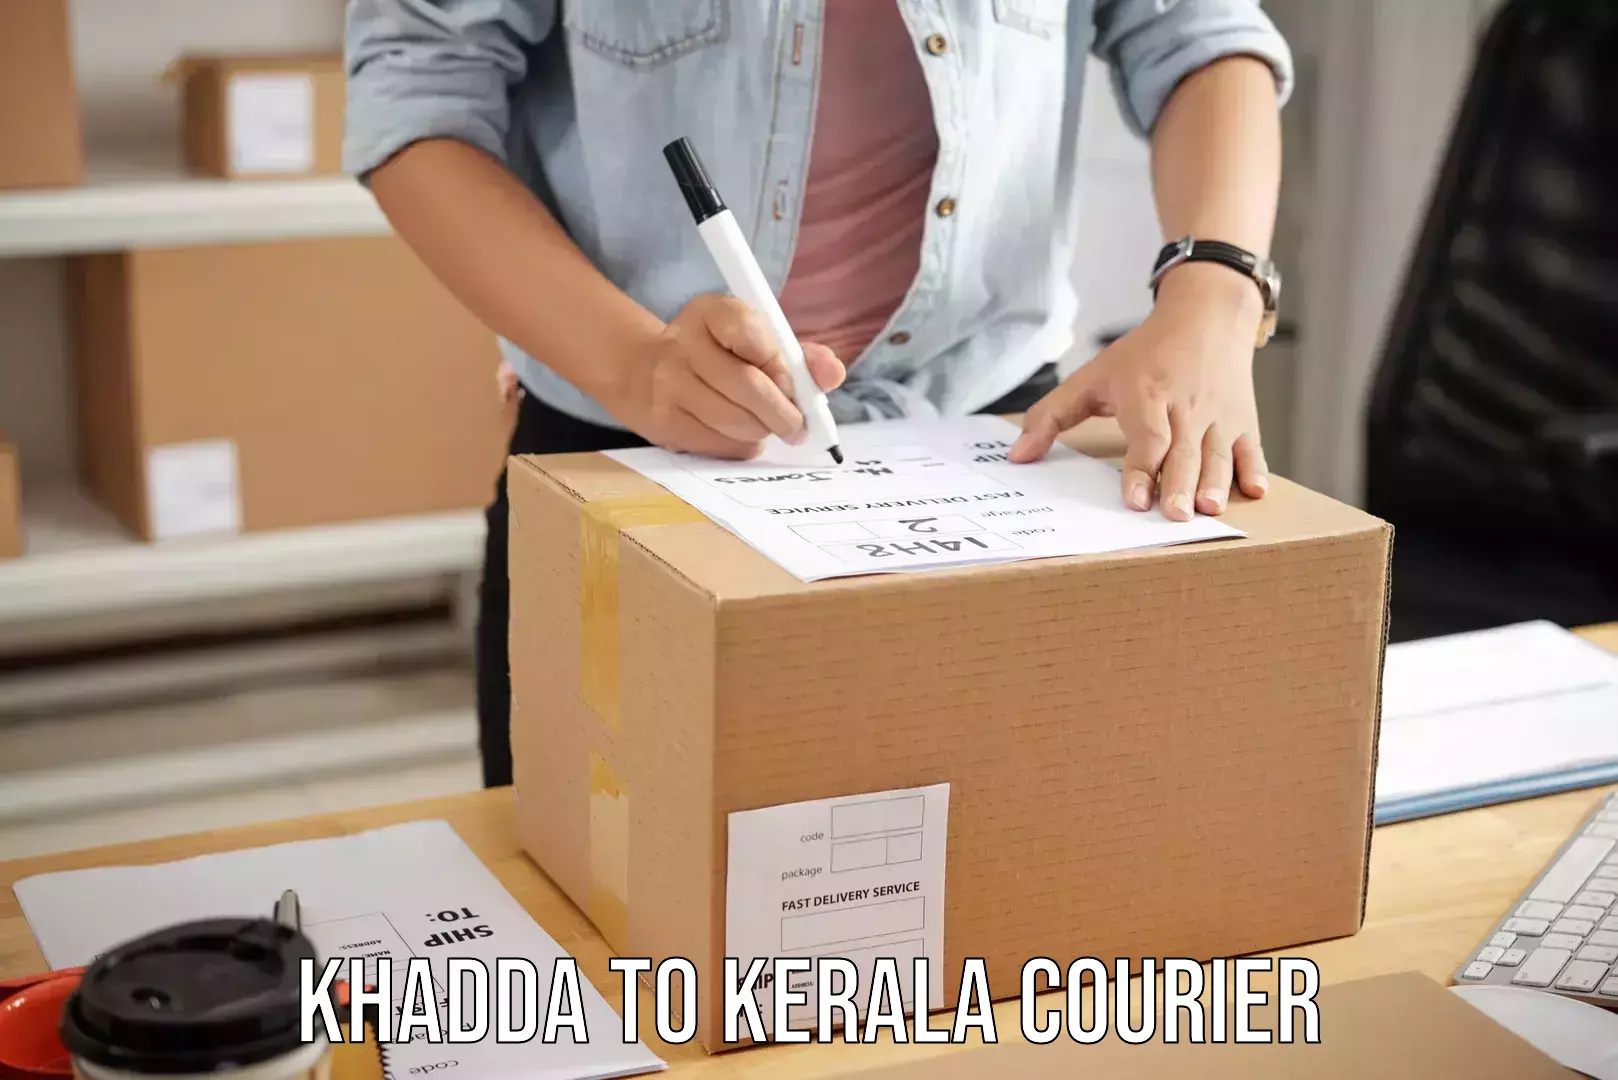 Sports equipment baggage shipping in Khadda to Cochin University of Science and Technology